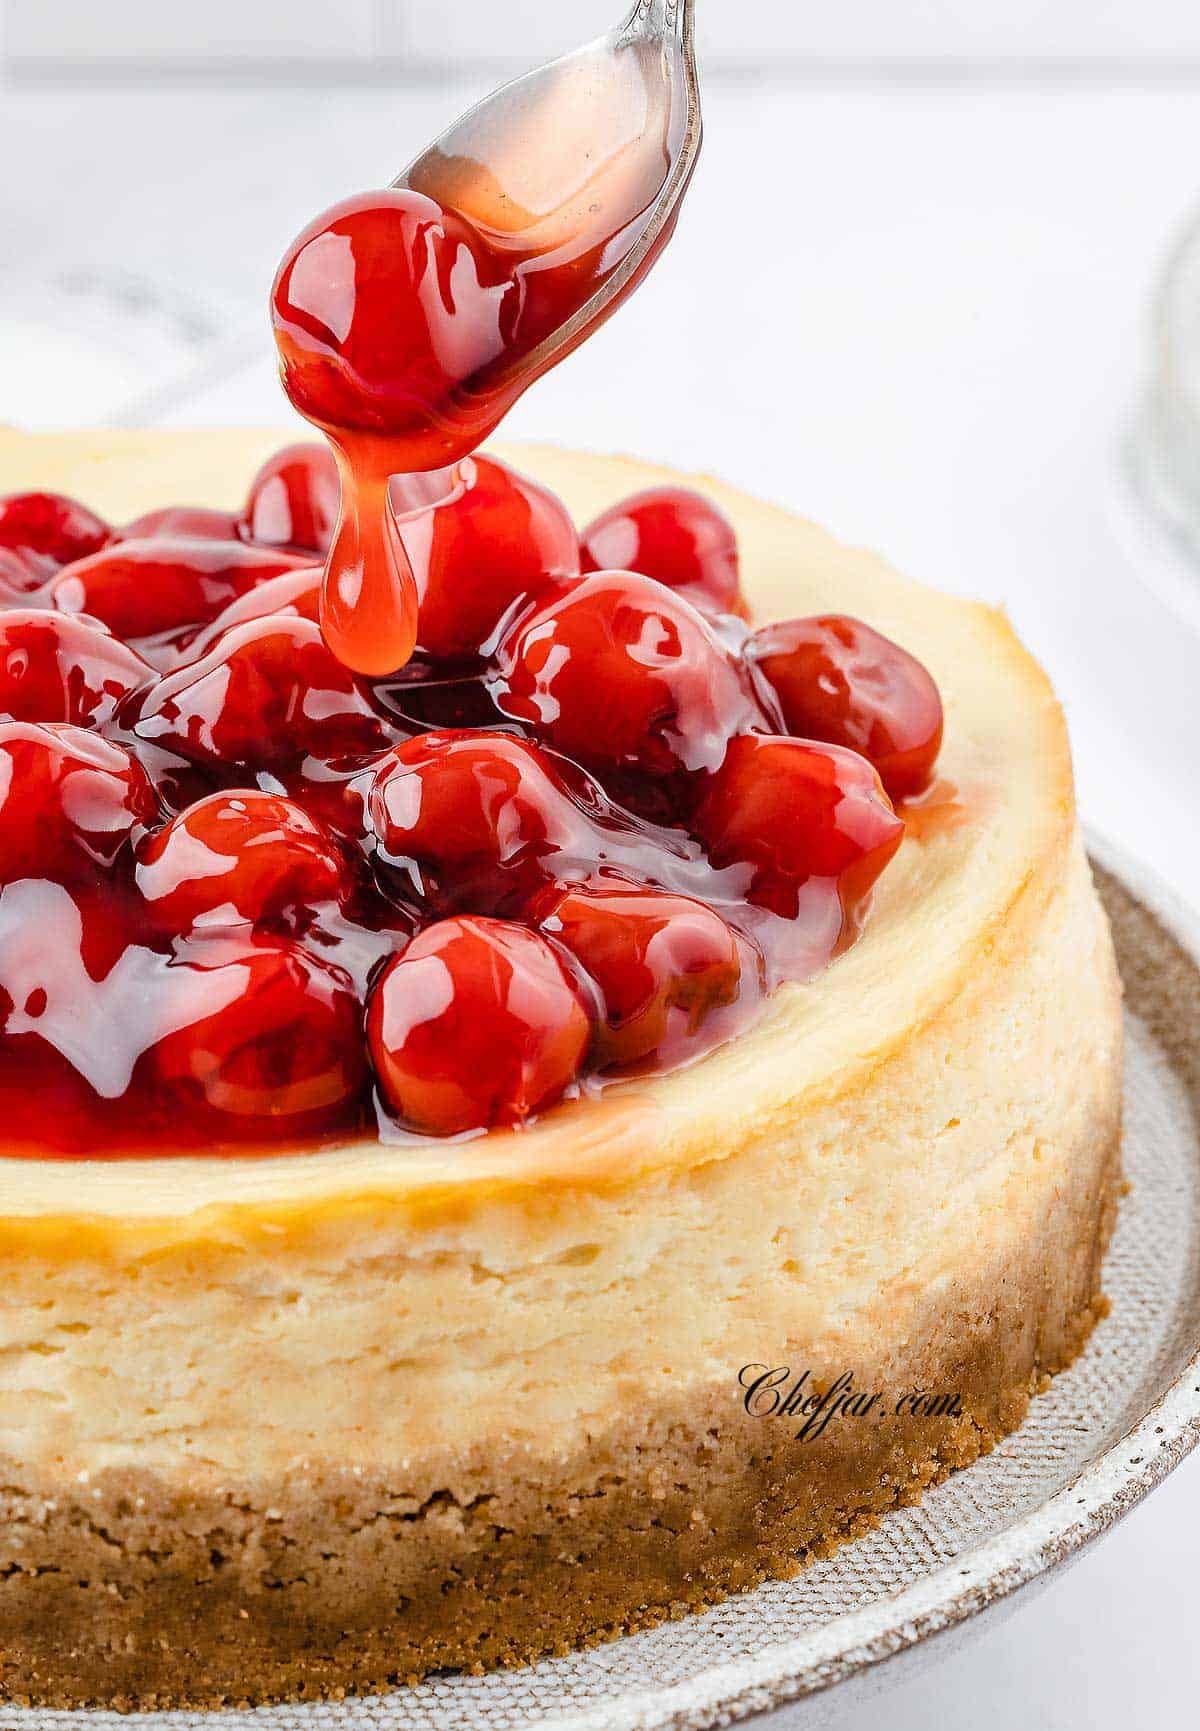 Pouring cherry sauce over the cheesecake.